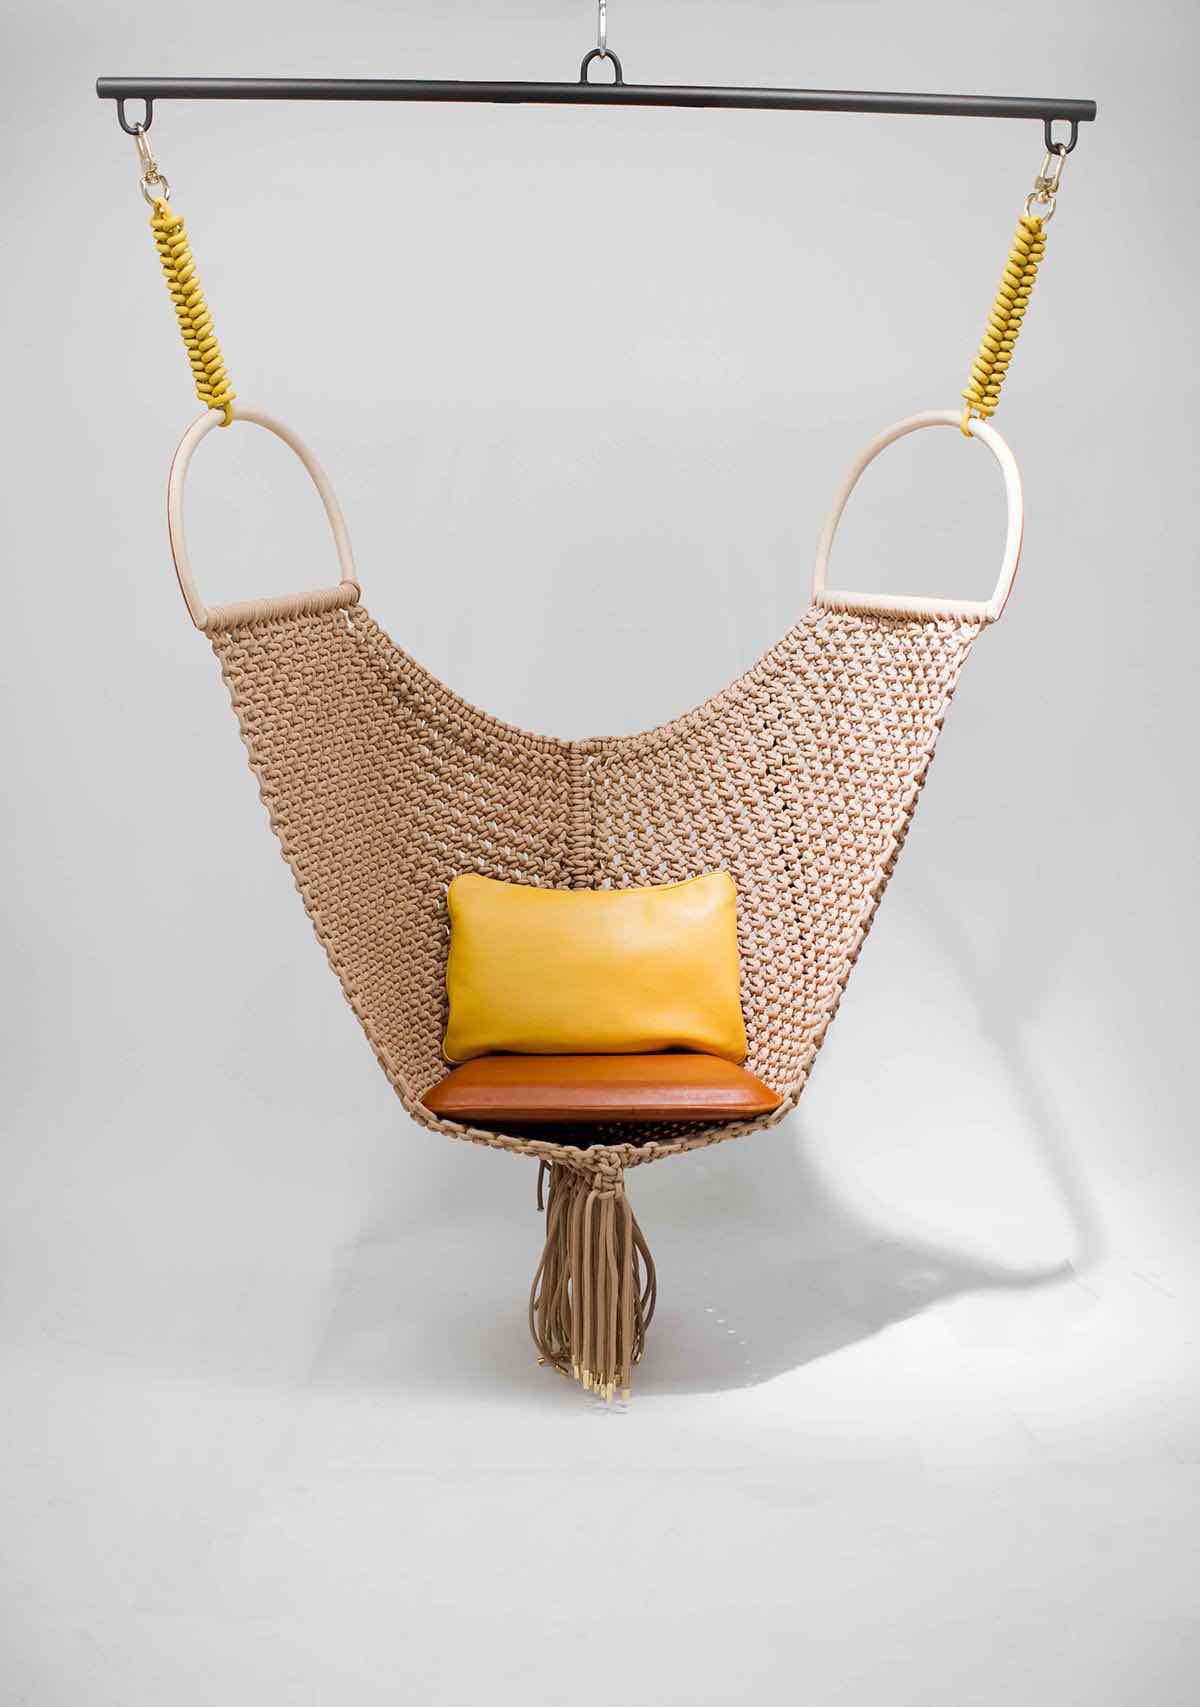 SWING Chair by Patricia Urquiola for Louis Vuitton